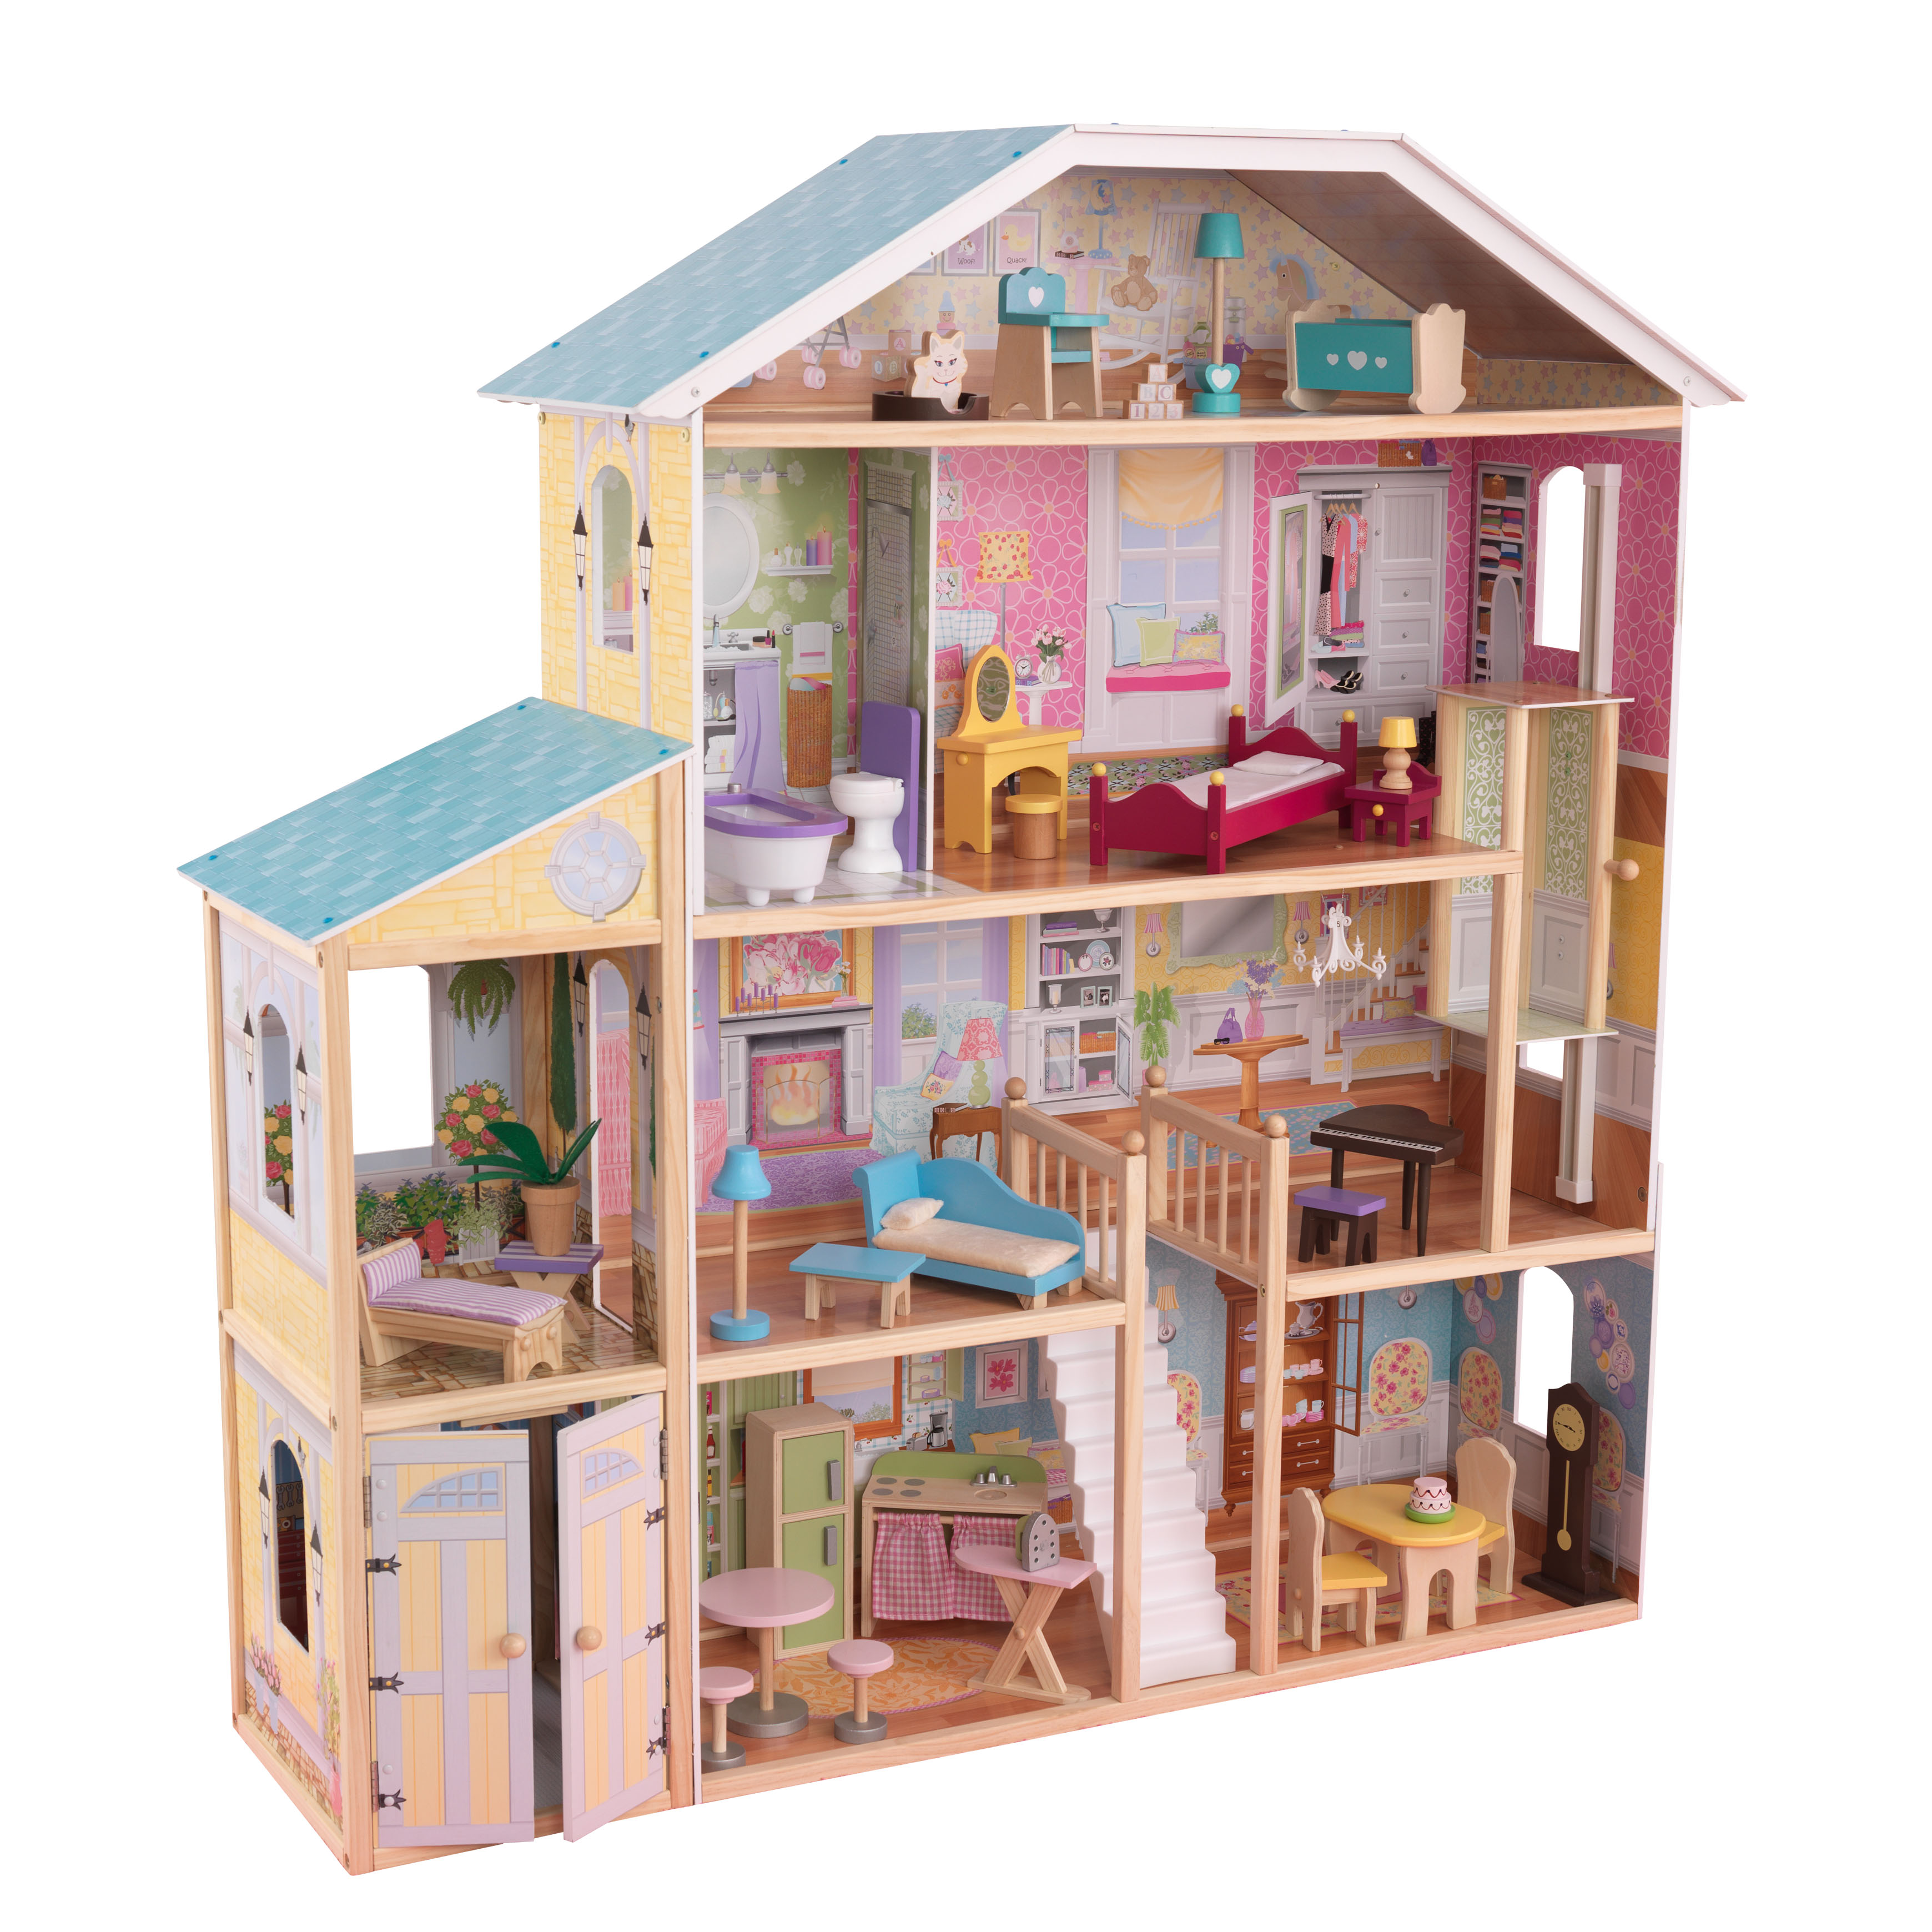 KidKraft Majestic Mansion Wooden Dollhouse with 34 Accessories - image 5 of 9